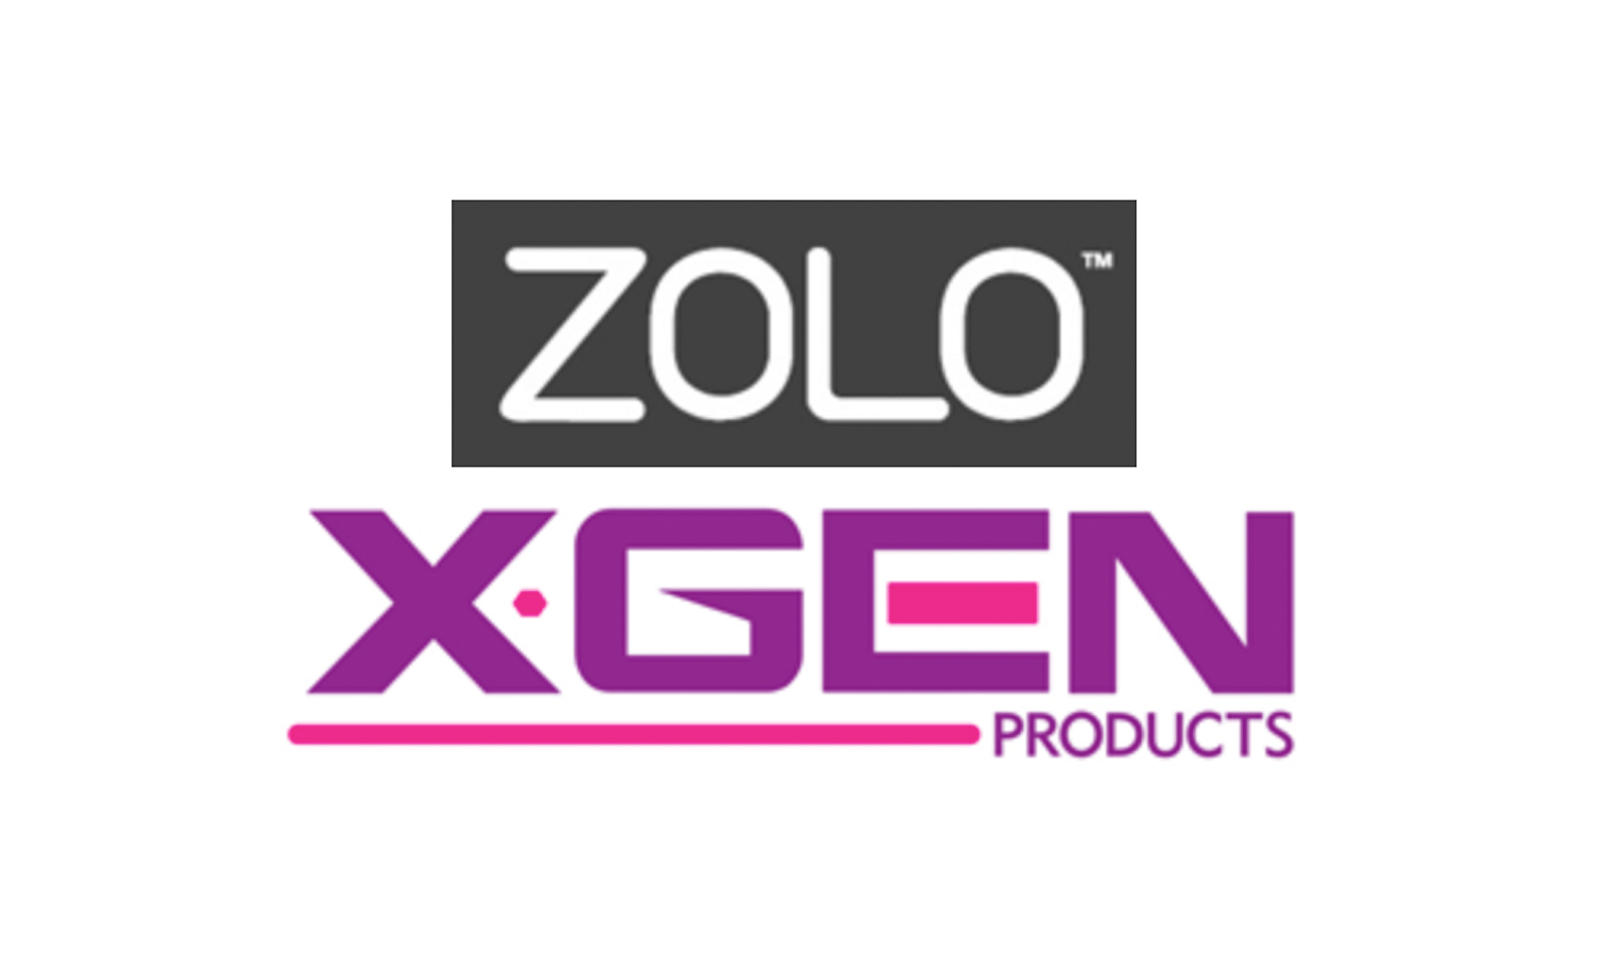 Newest Zolo Items Shipping From Xgen Products